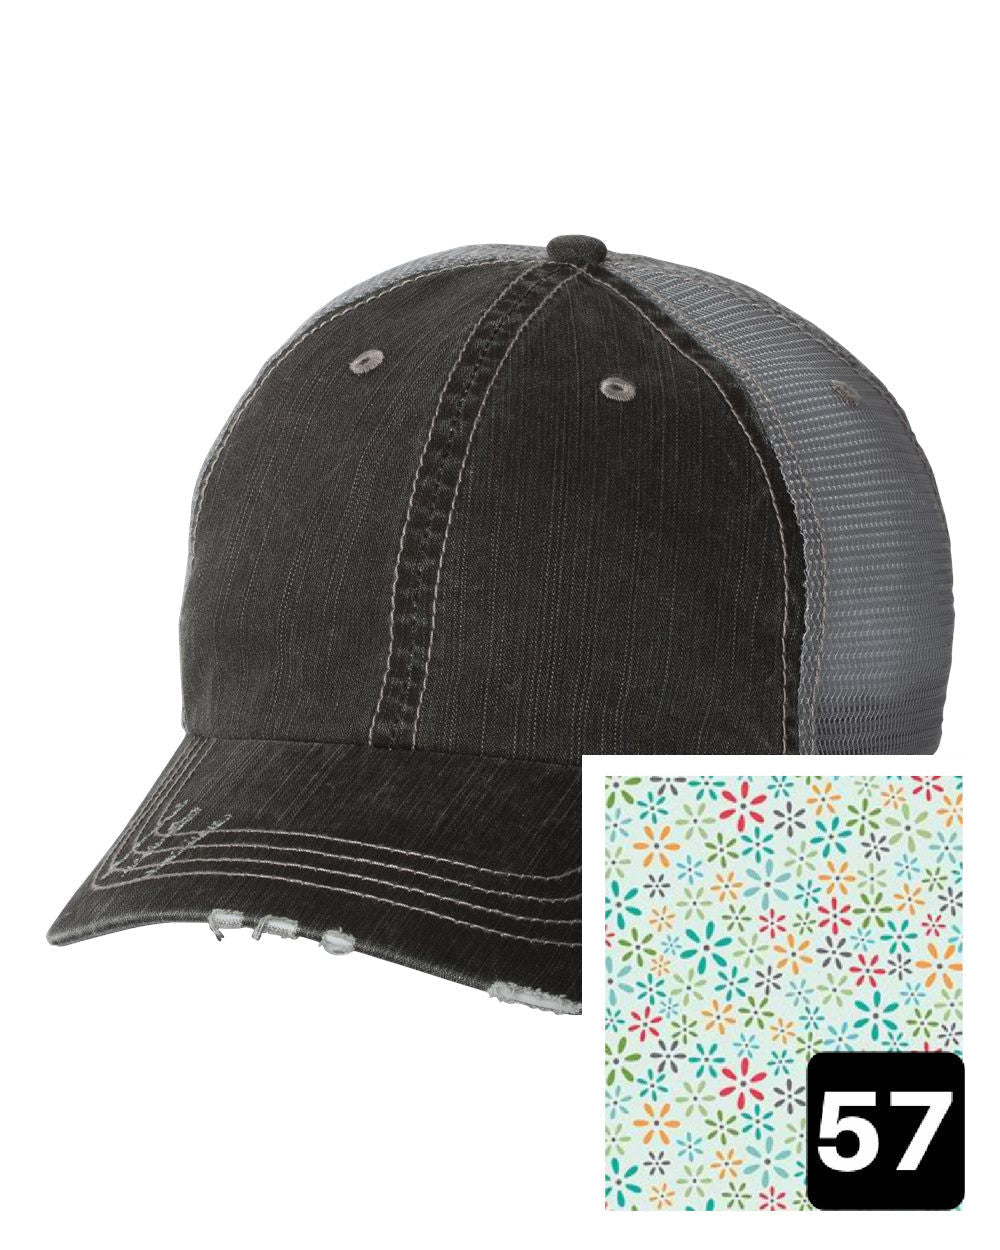 gray distressed trucker hat with white daisy on yellow fabric state of Delaware